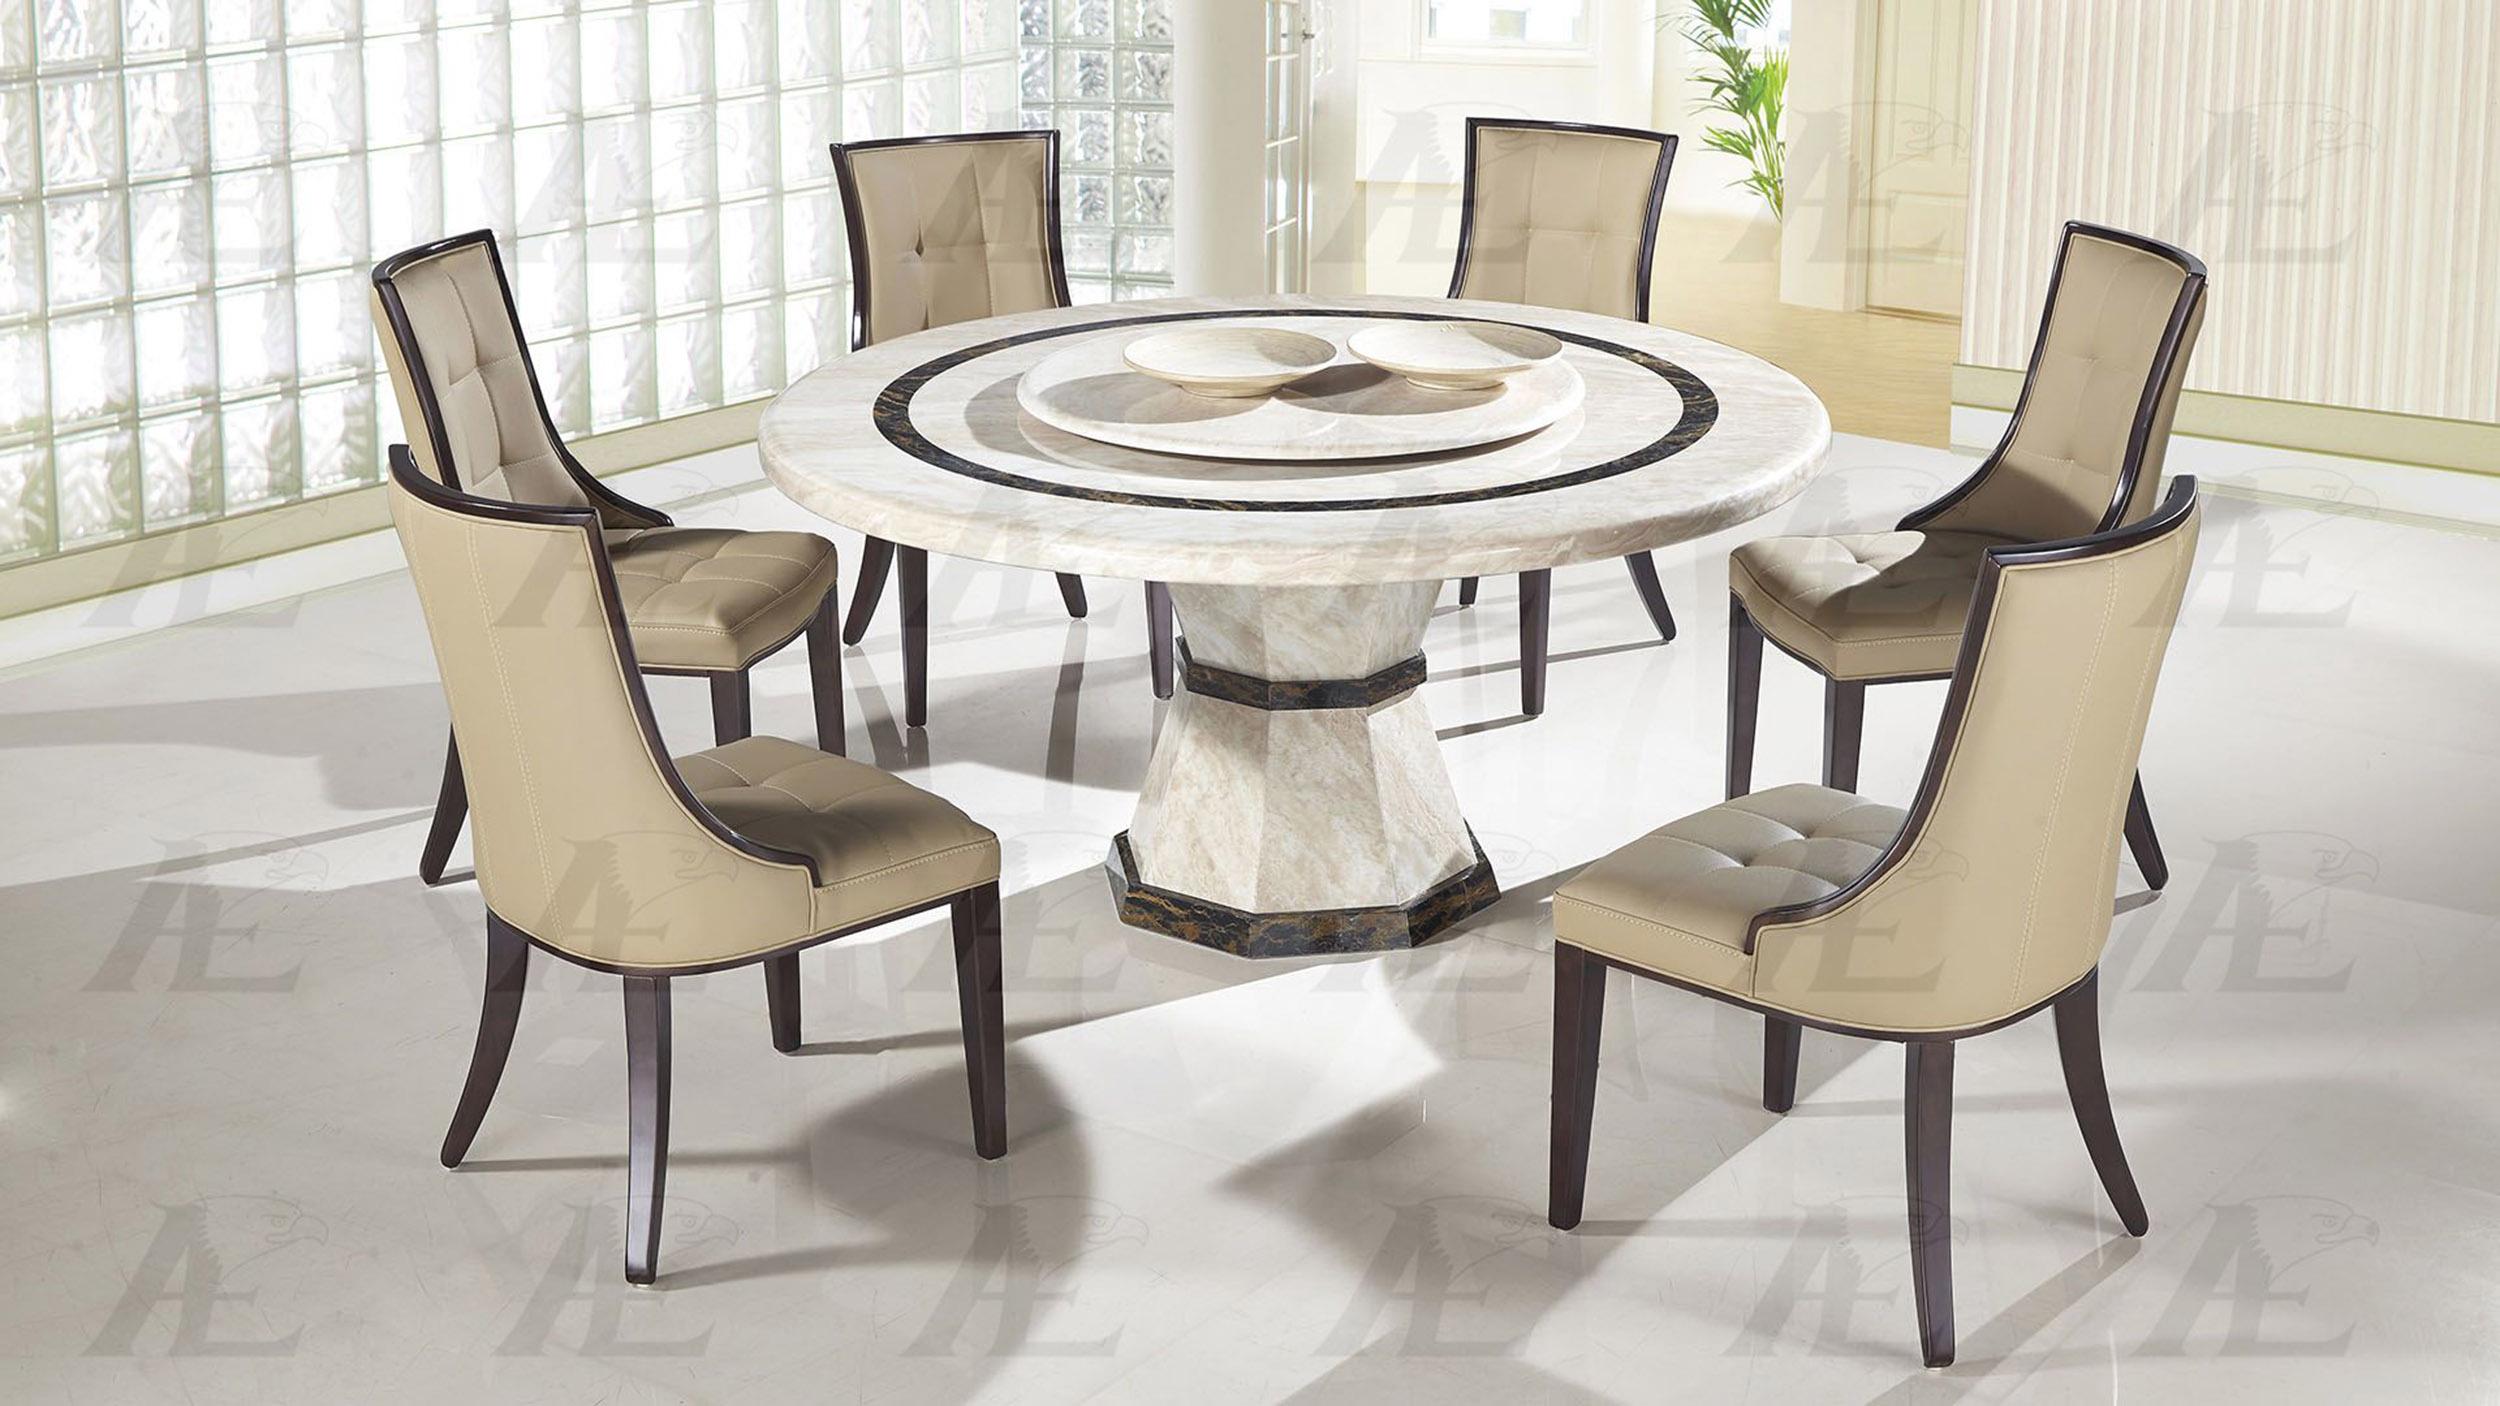 Modern Dining Table Set DT-H38 / CK-H603-TAN DT-H38-7PC in Beige PU